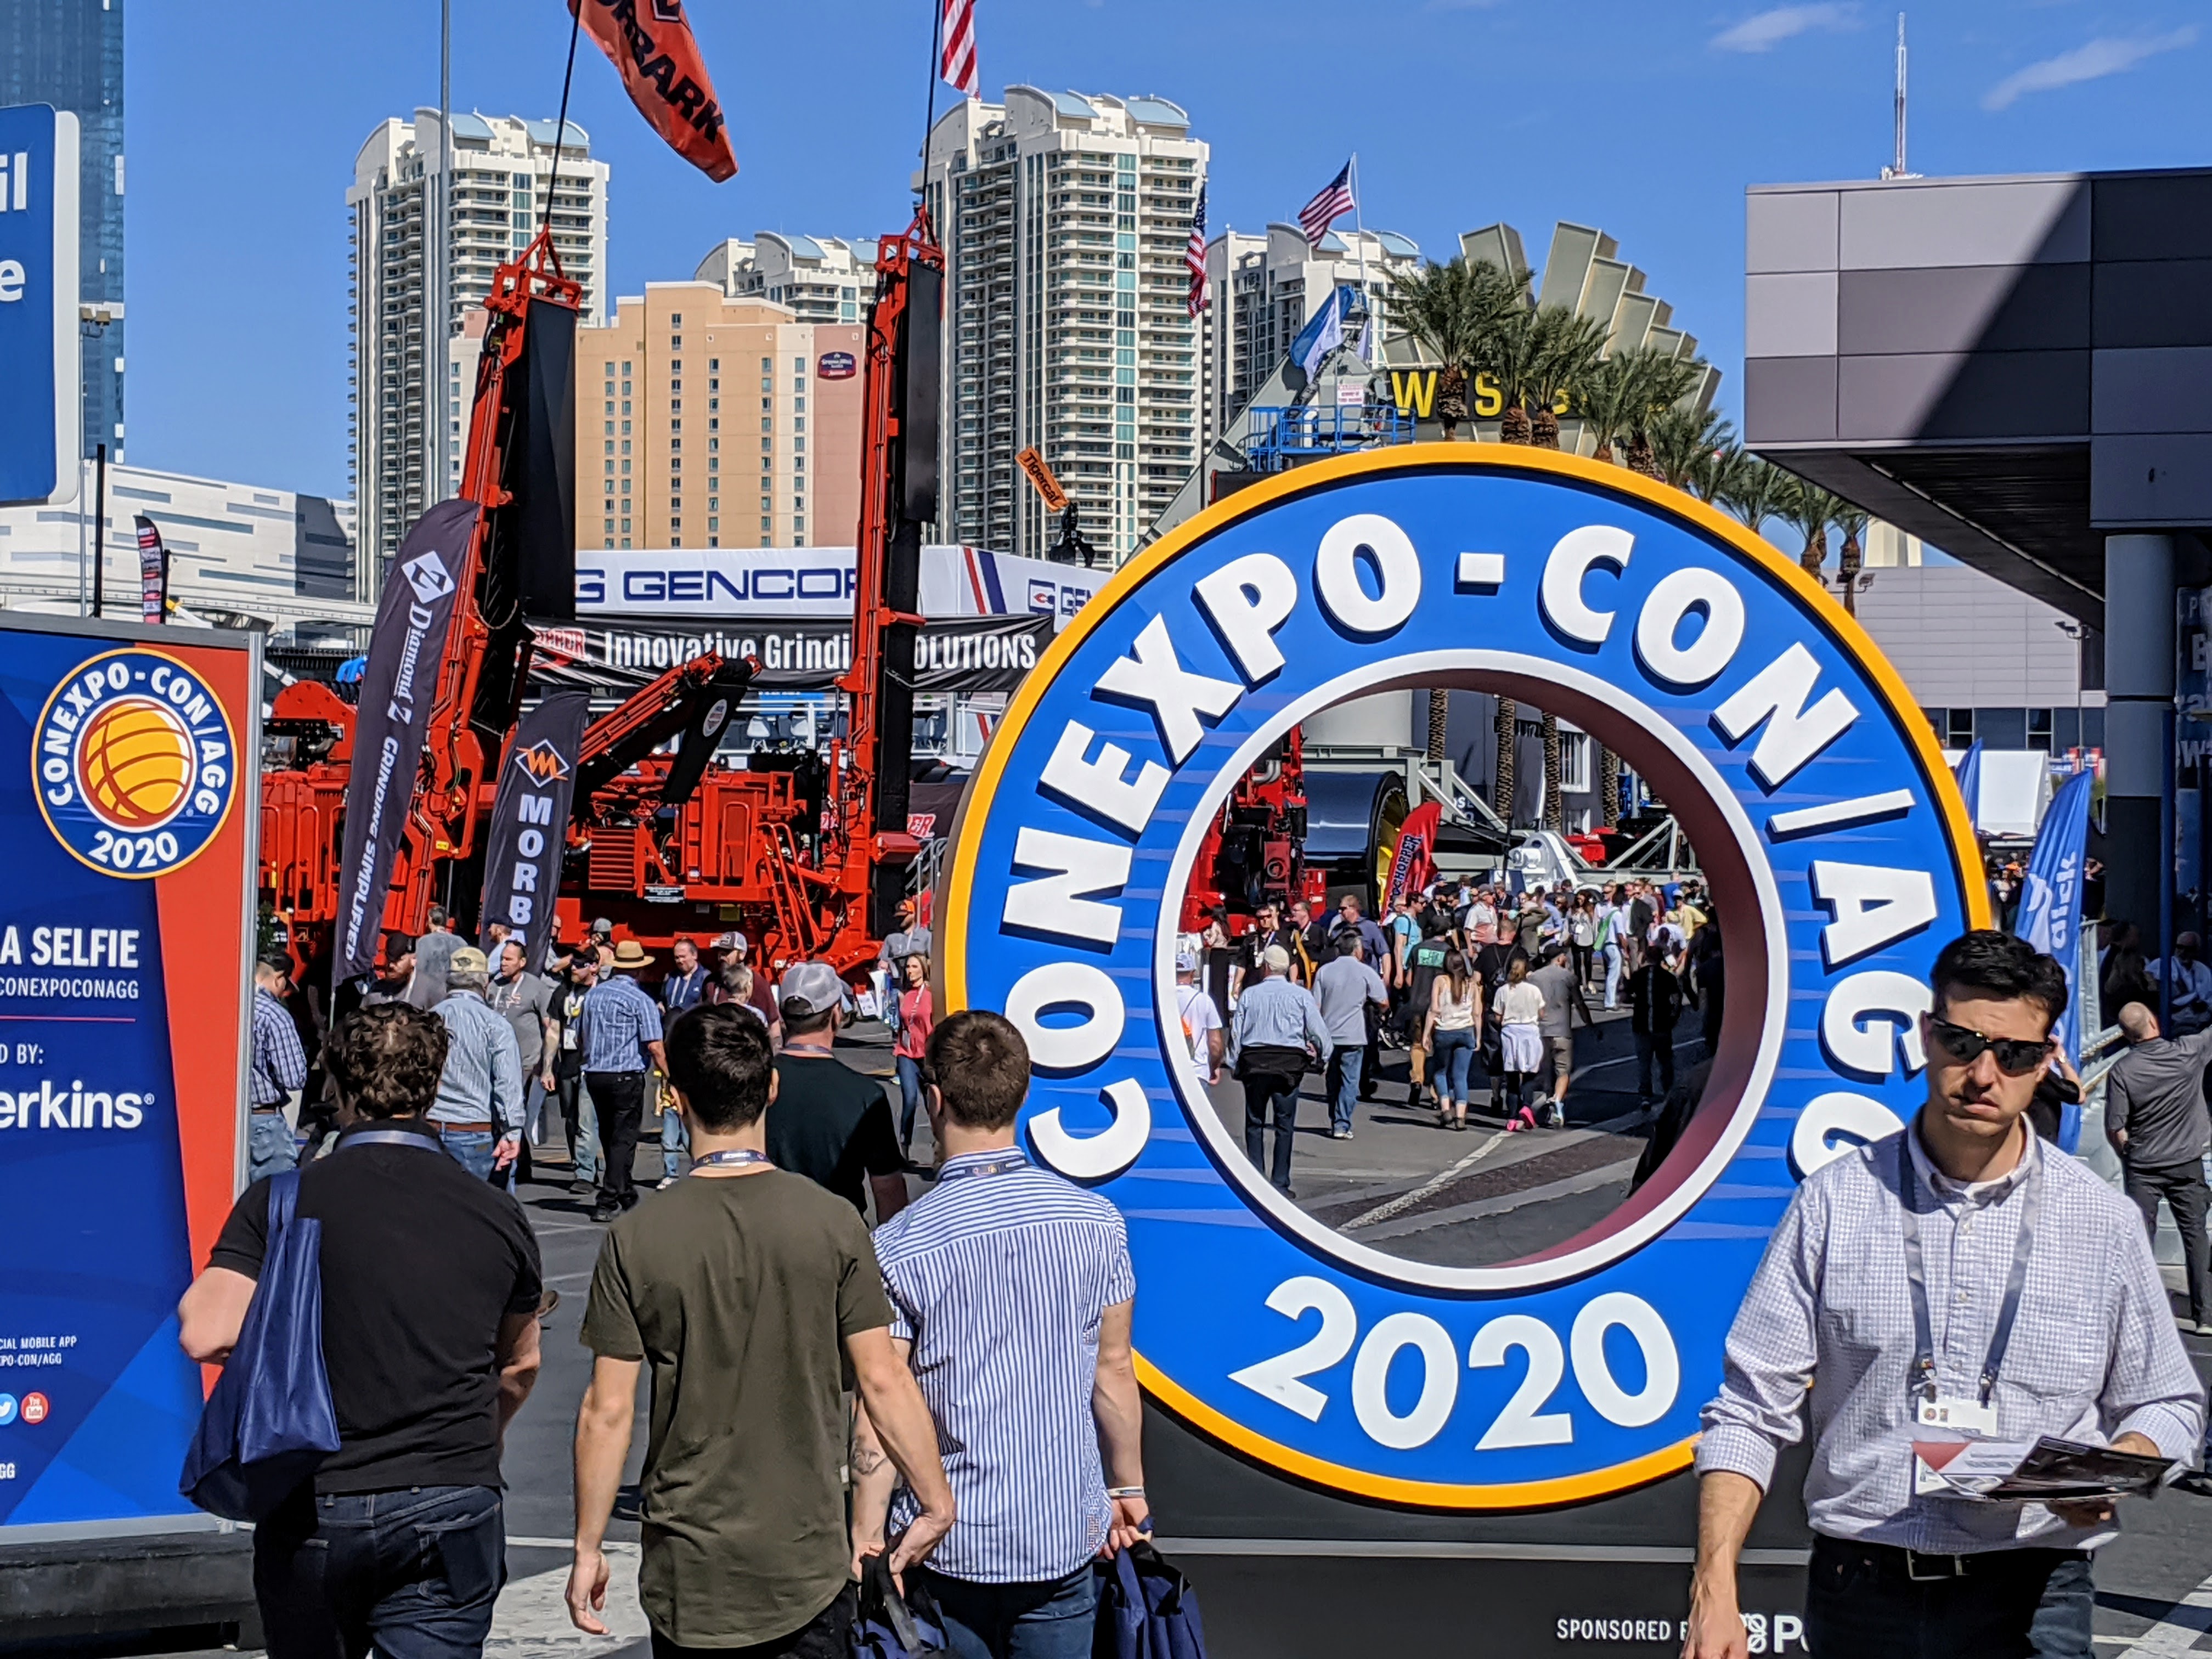 CONEXPOCON/AGG Delivers Largest Show Ever, Despite Health and Travel